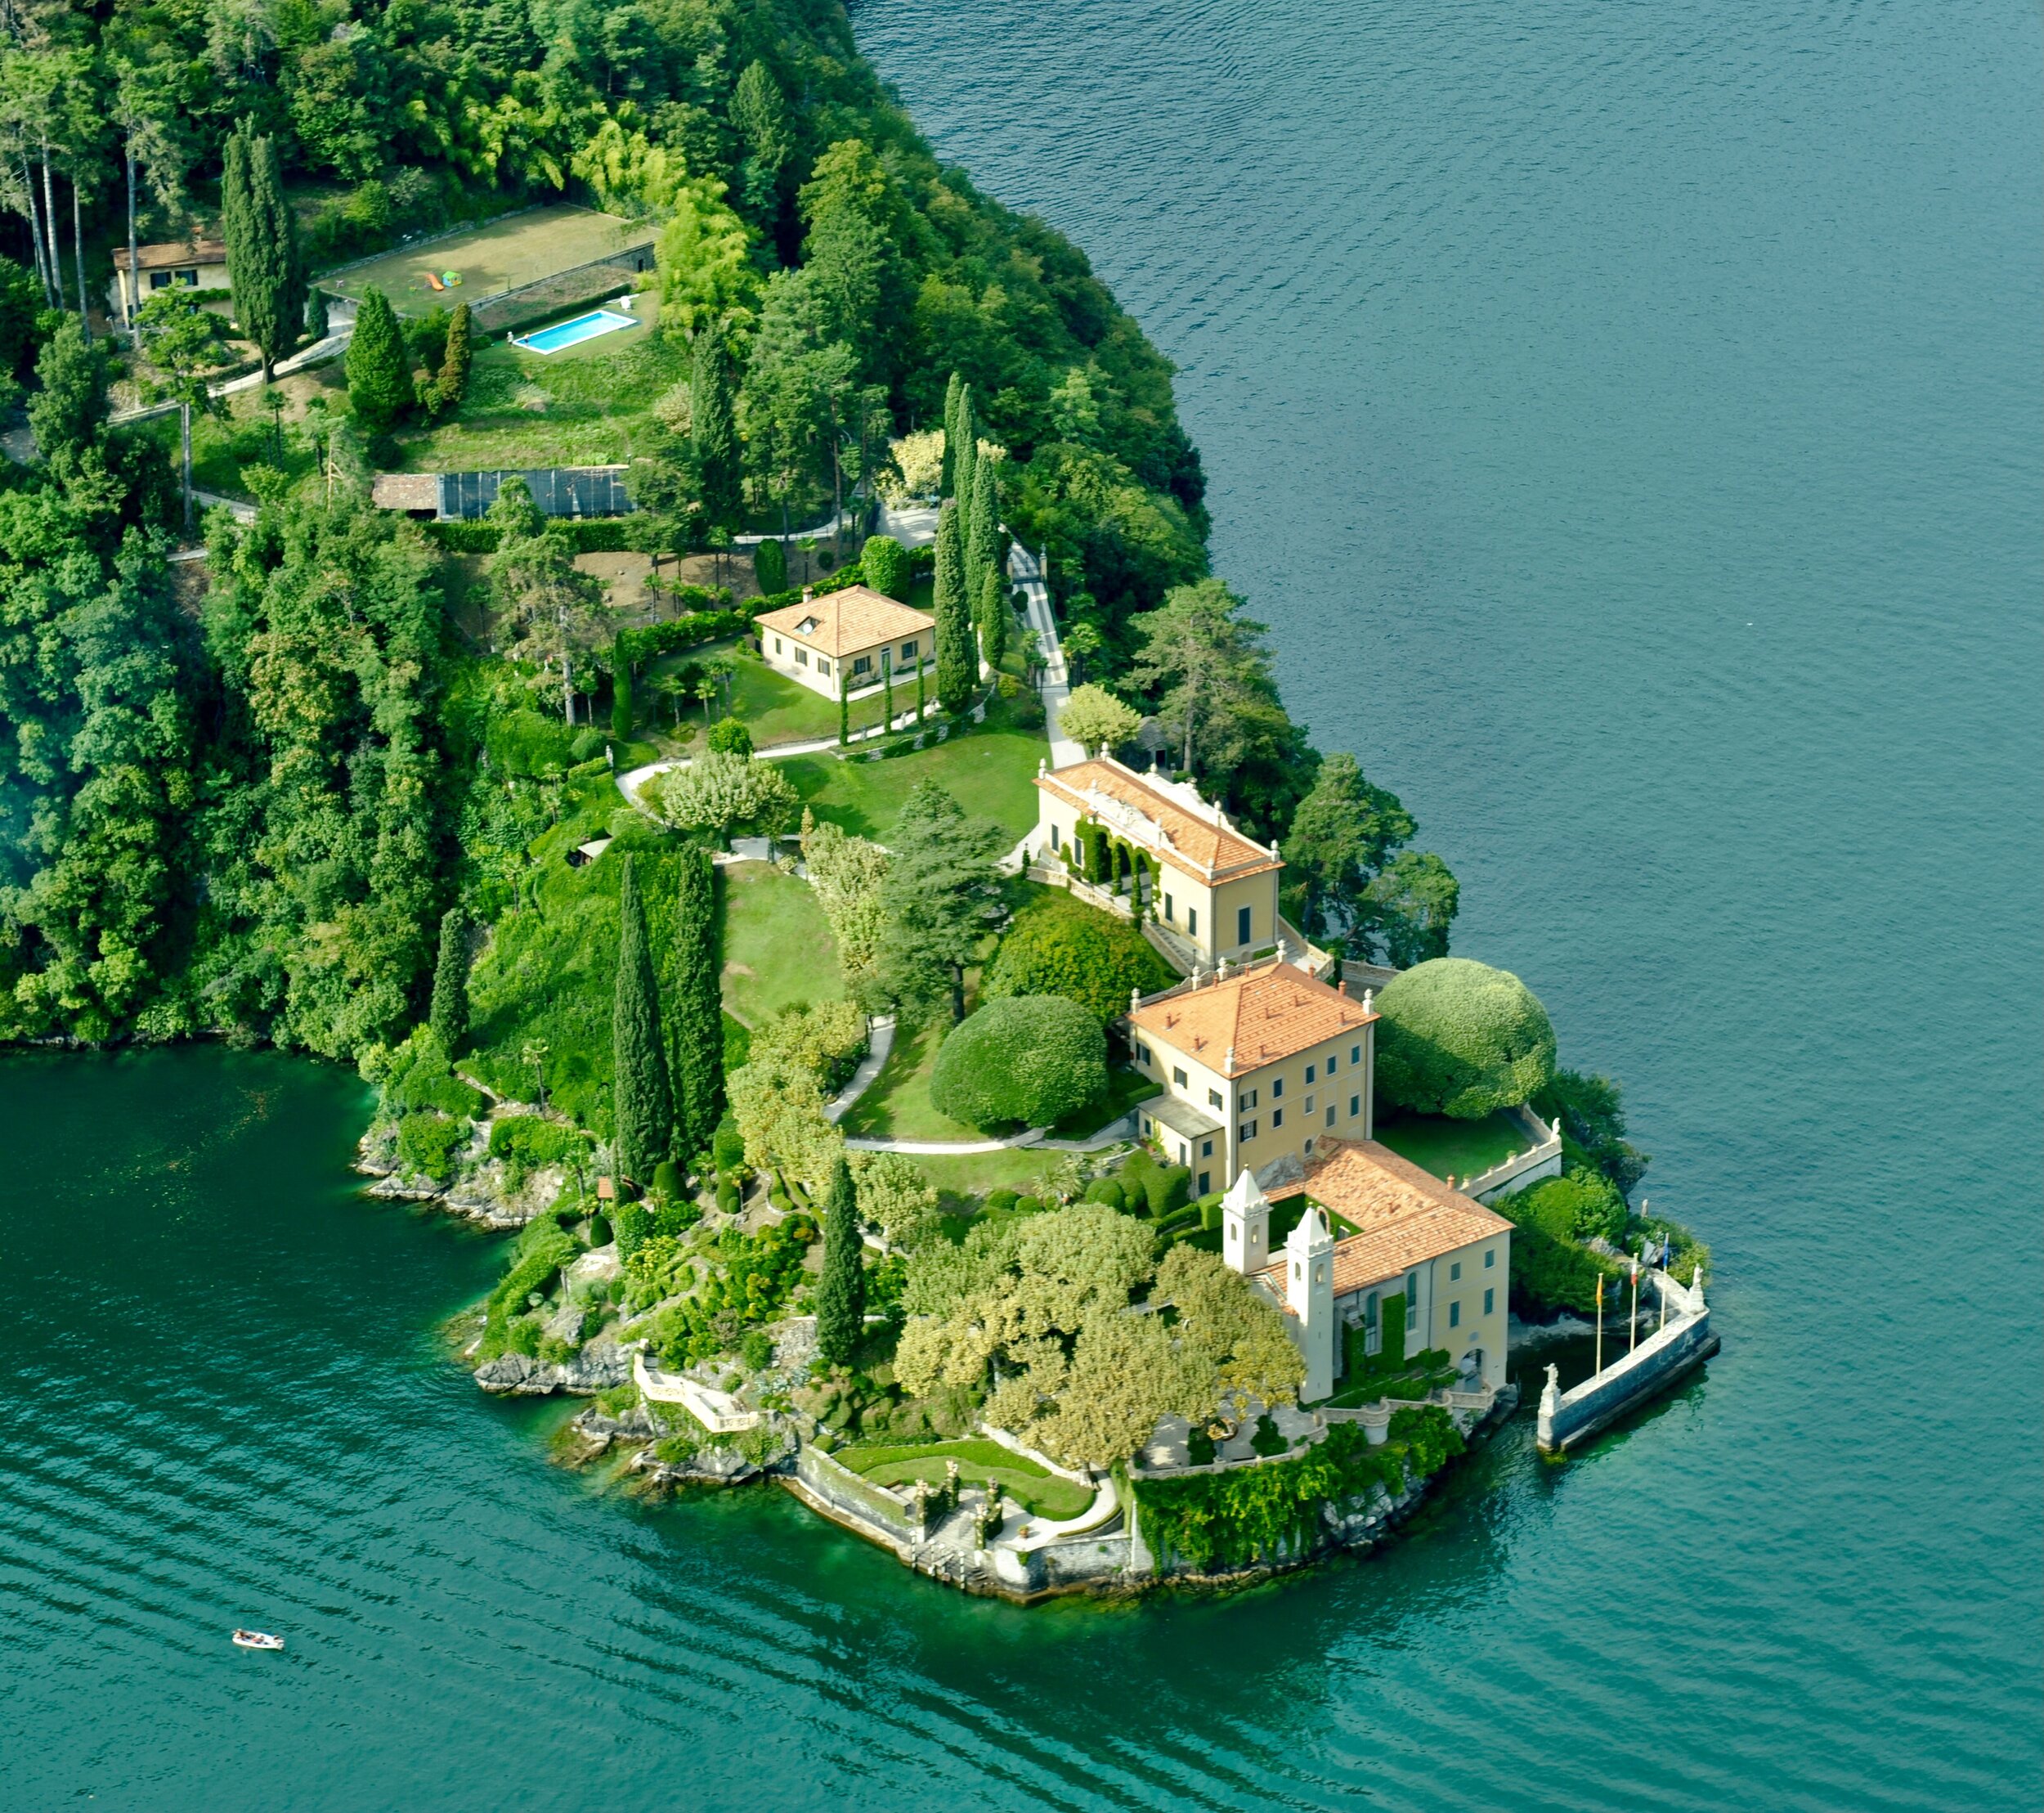 Lucy-Till-French-Weddings-Luxury-Wedding-Planner-France-Provence-French-Riviera-Provence-Alps-Italy-Lake-Como-Villa-Del-Balbianello.jpg